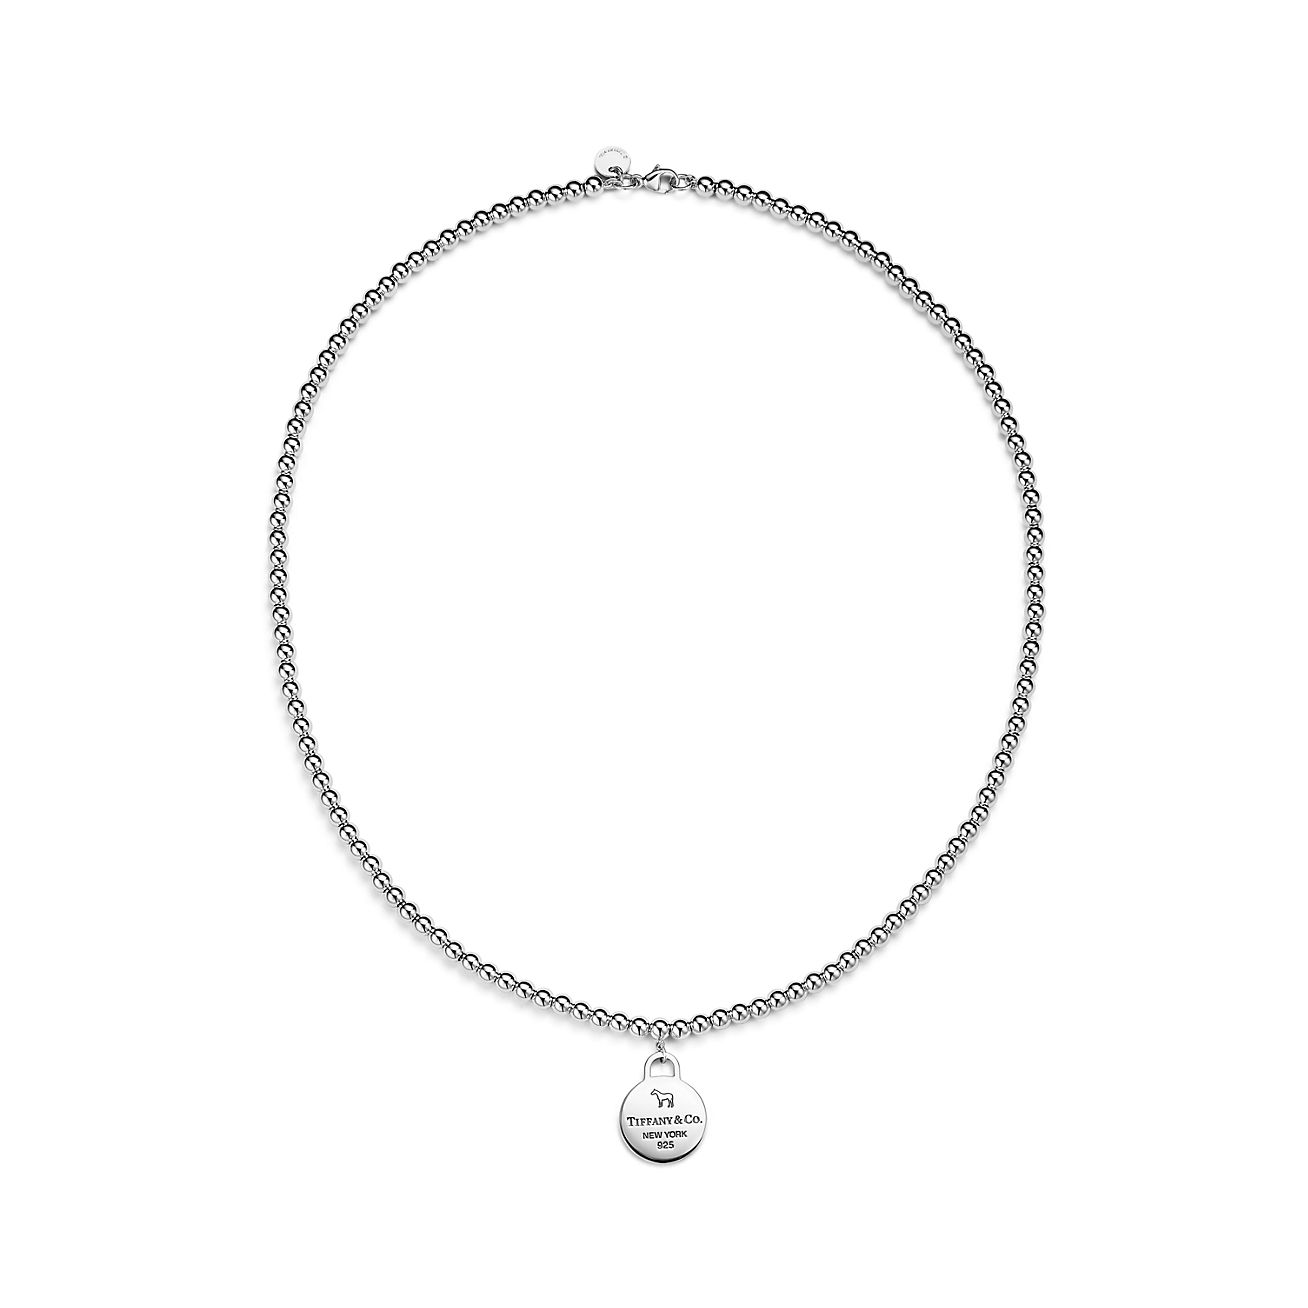 The Return to Tiffany® x Beyoncé Collection Round Tag Necklace in Silver